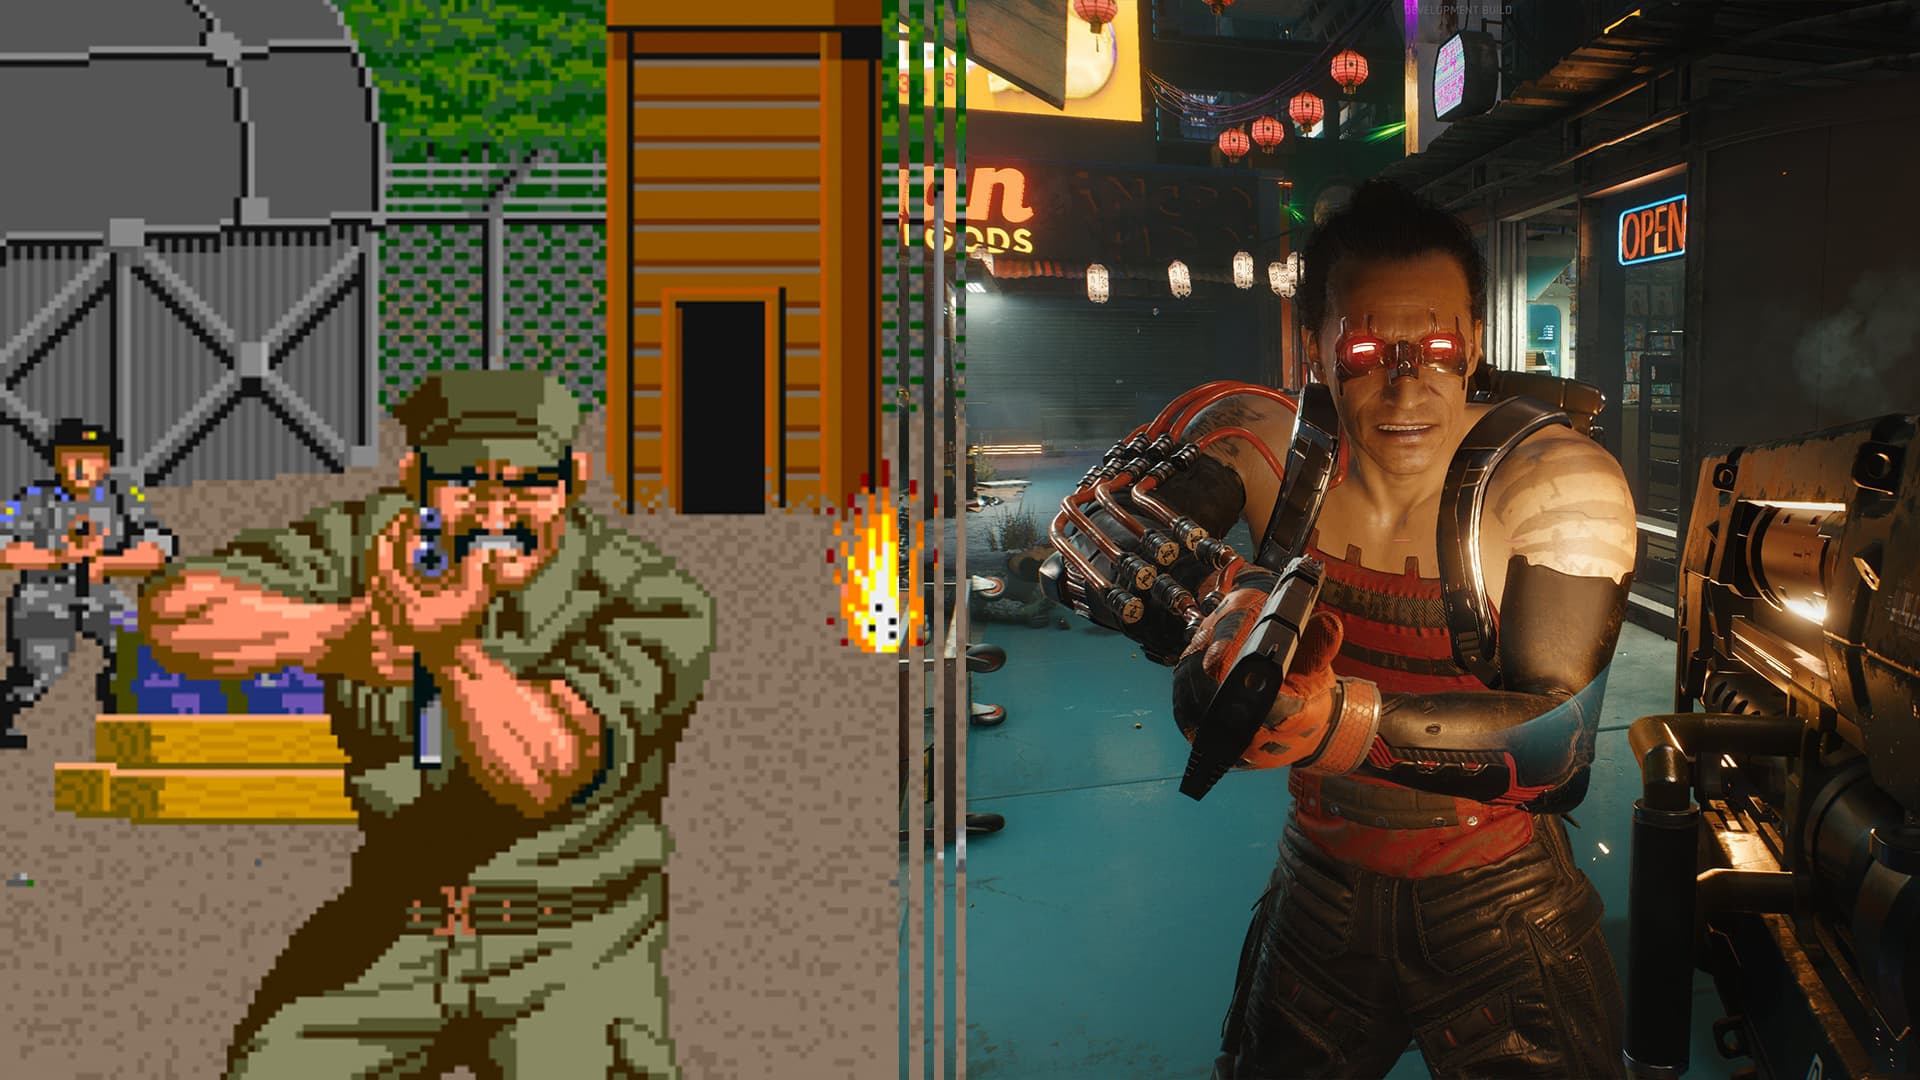 From Pixels to Virtual Reality: The Evolution of Gaming Graphics